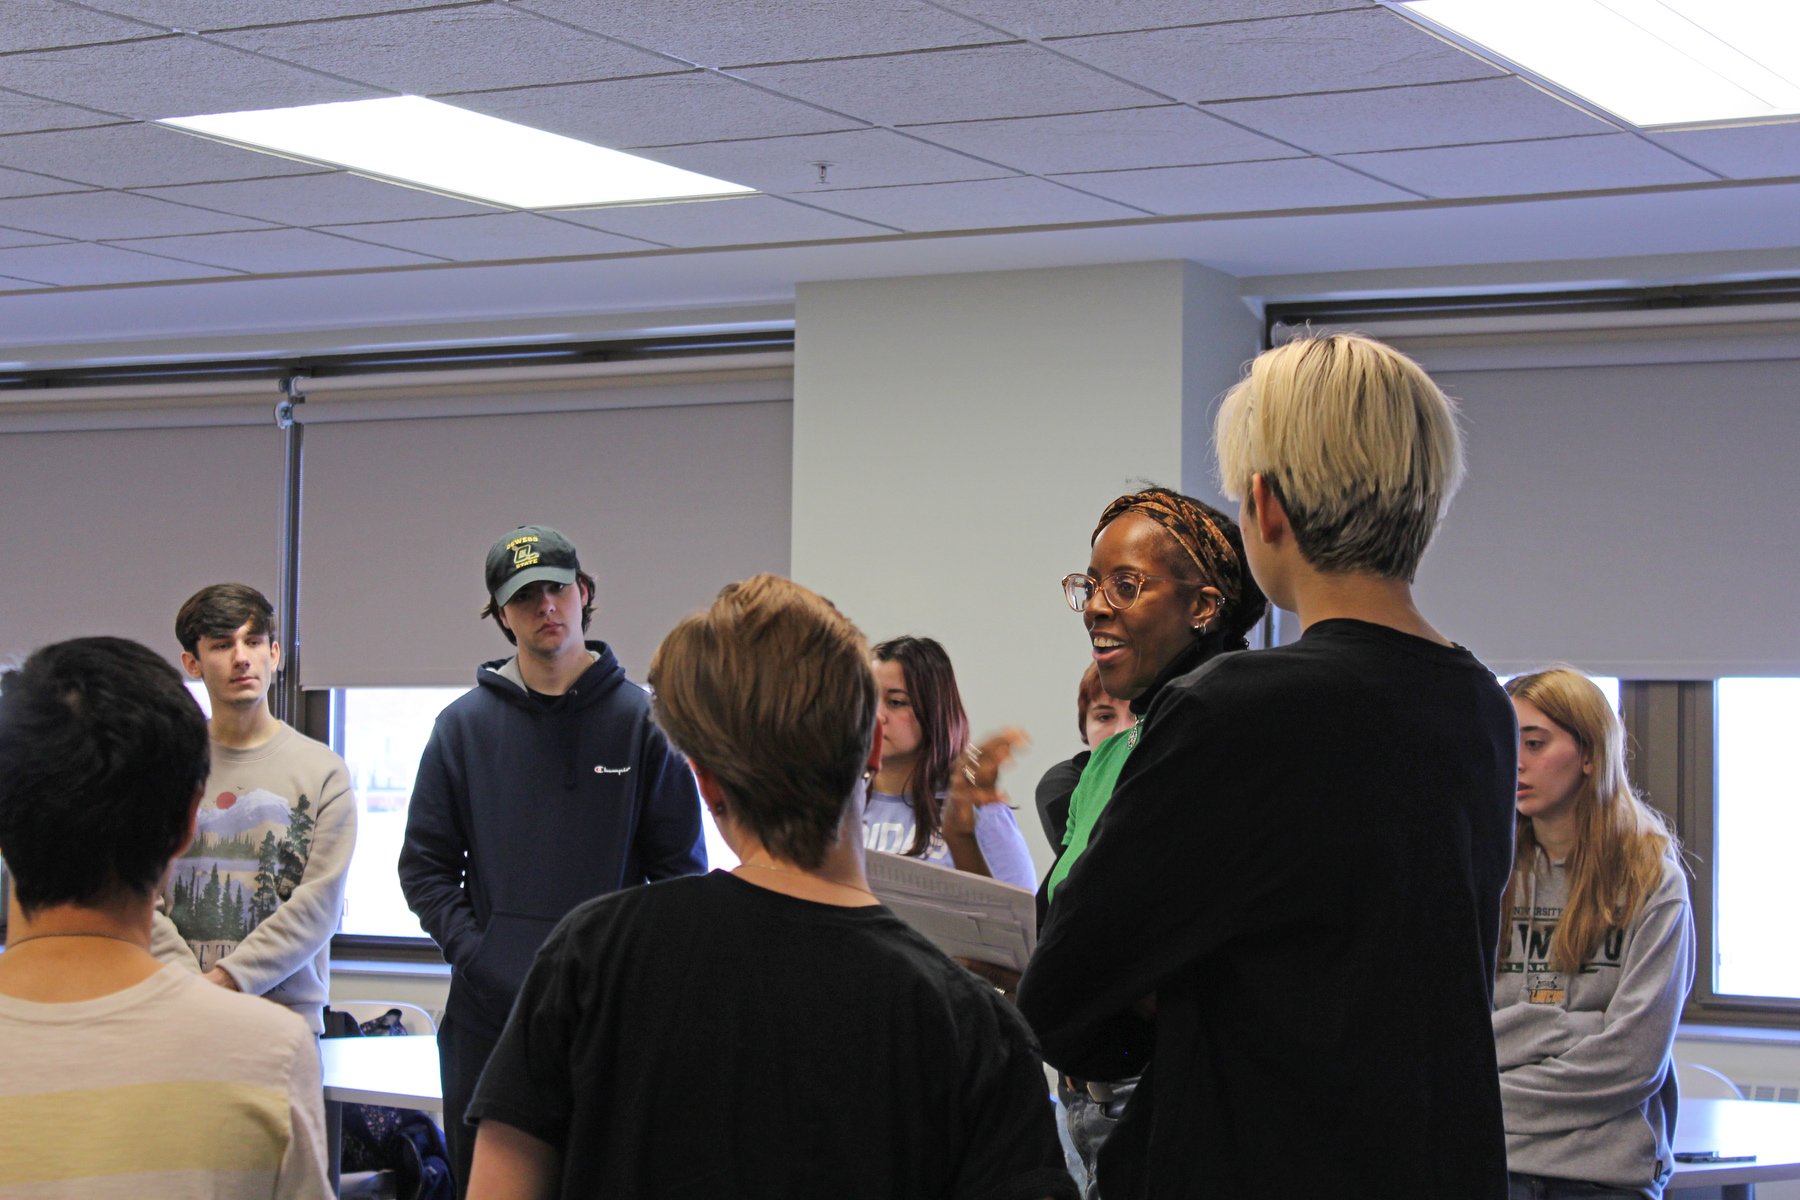 The five-member Actors From The London Stage touring company visited a number of classes across campus while in town to perform “A Midsummer Night’s Dream.” Actor Natasha Bain (pictured) visits Lisa Glidden's Global Politics class in Marano Campus Center. (Photo by Graceann Cleator)